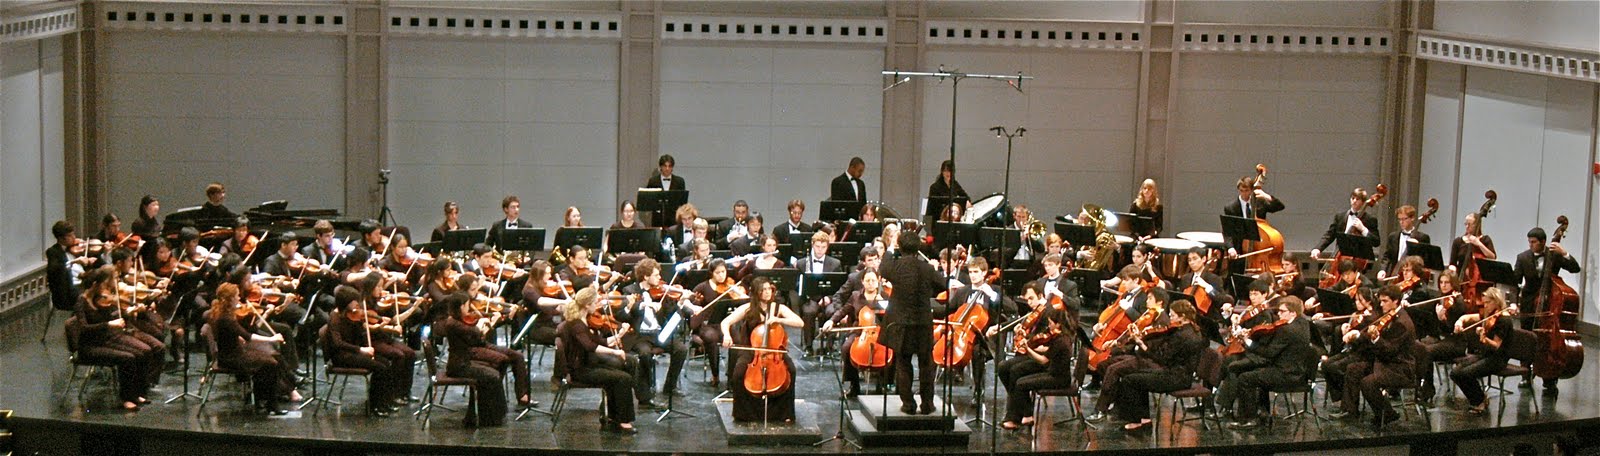 The Cornell University Symphony Orchestra Chris Kim conductor of Ithaca